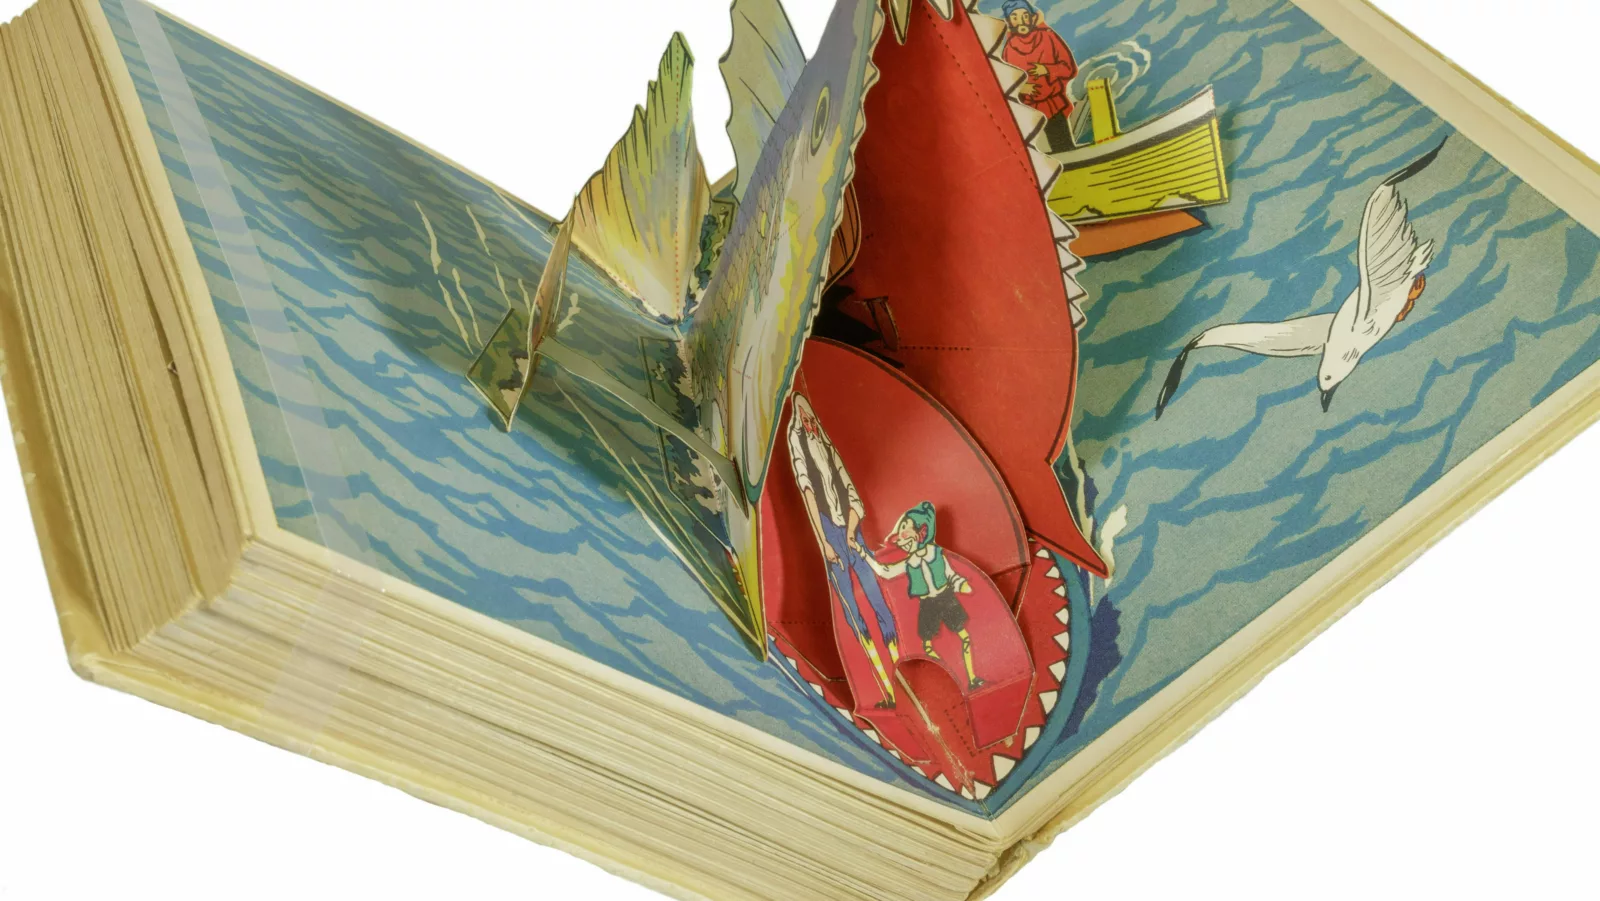 A whale's mouth opens in a pop-up book. Inside the whale's mouth are Pinocchio and Geppettoo